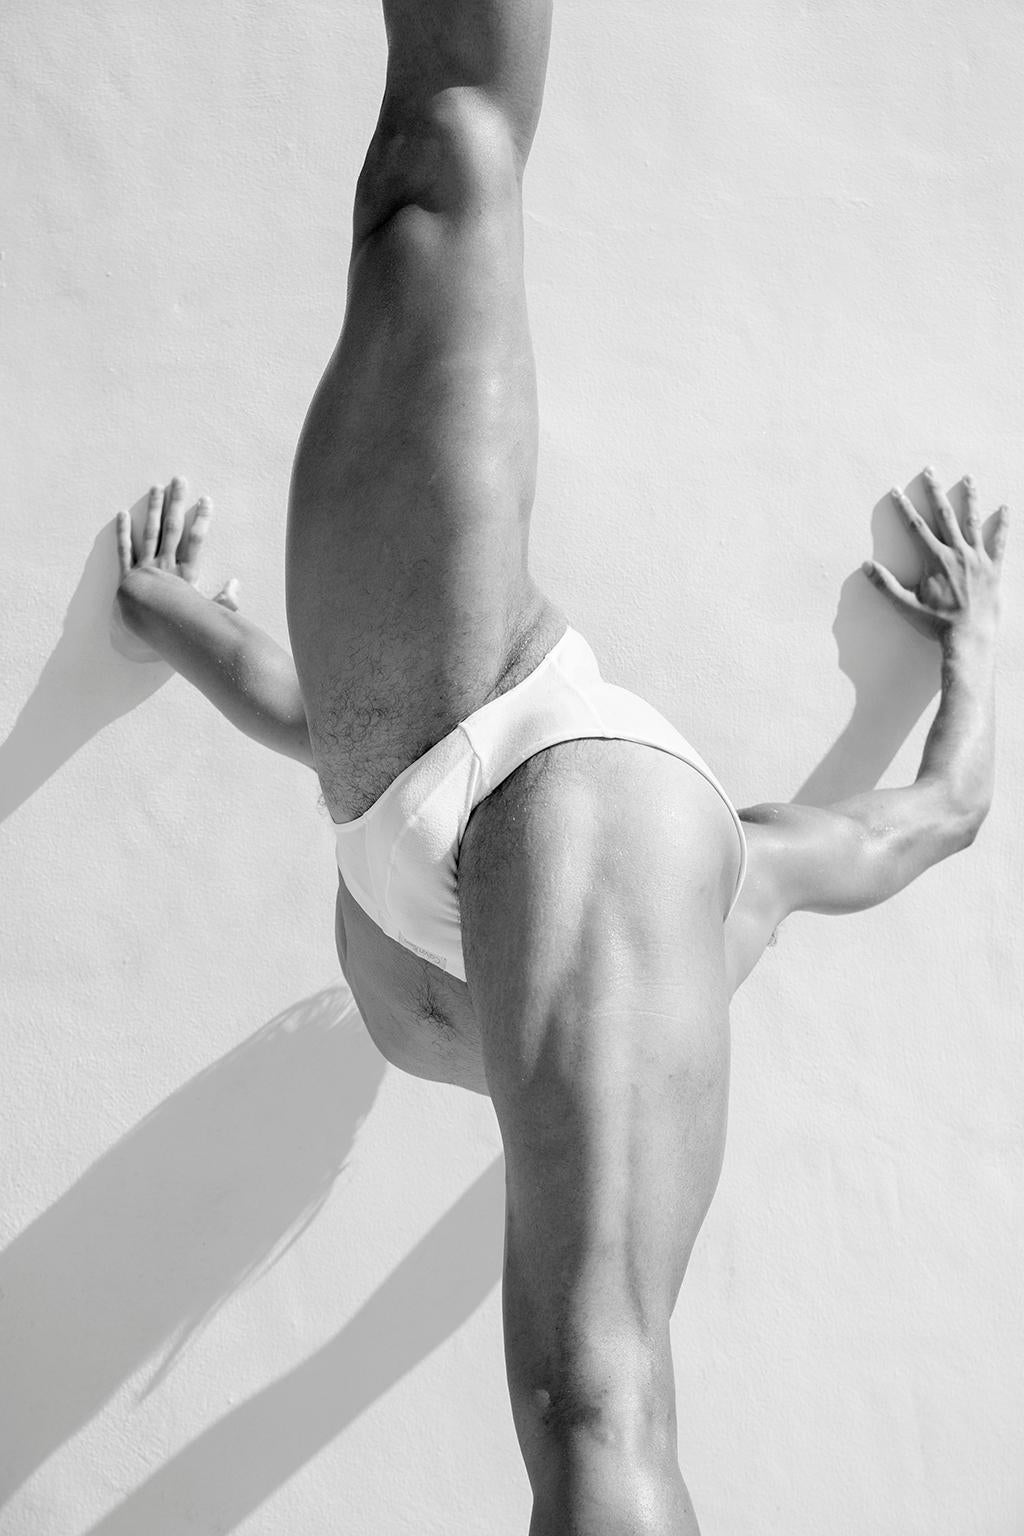 Ricky Cohete Nude Photograph - Men Legs, One. Motion Series. Male Nude Black and White Photograph